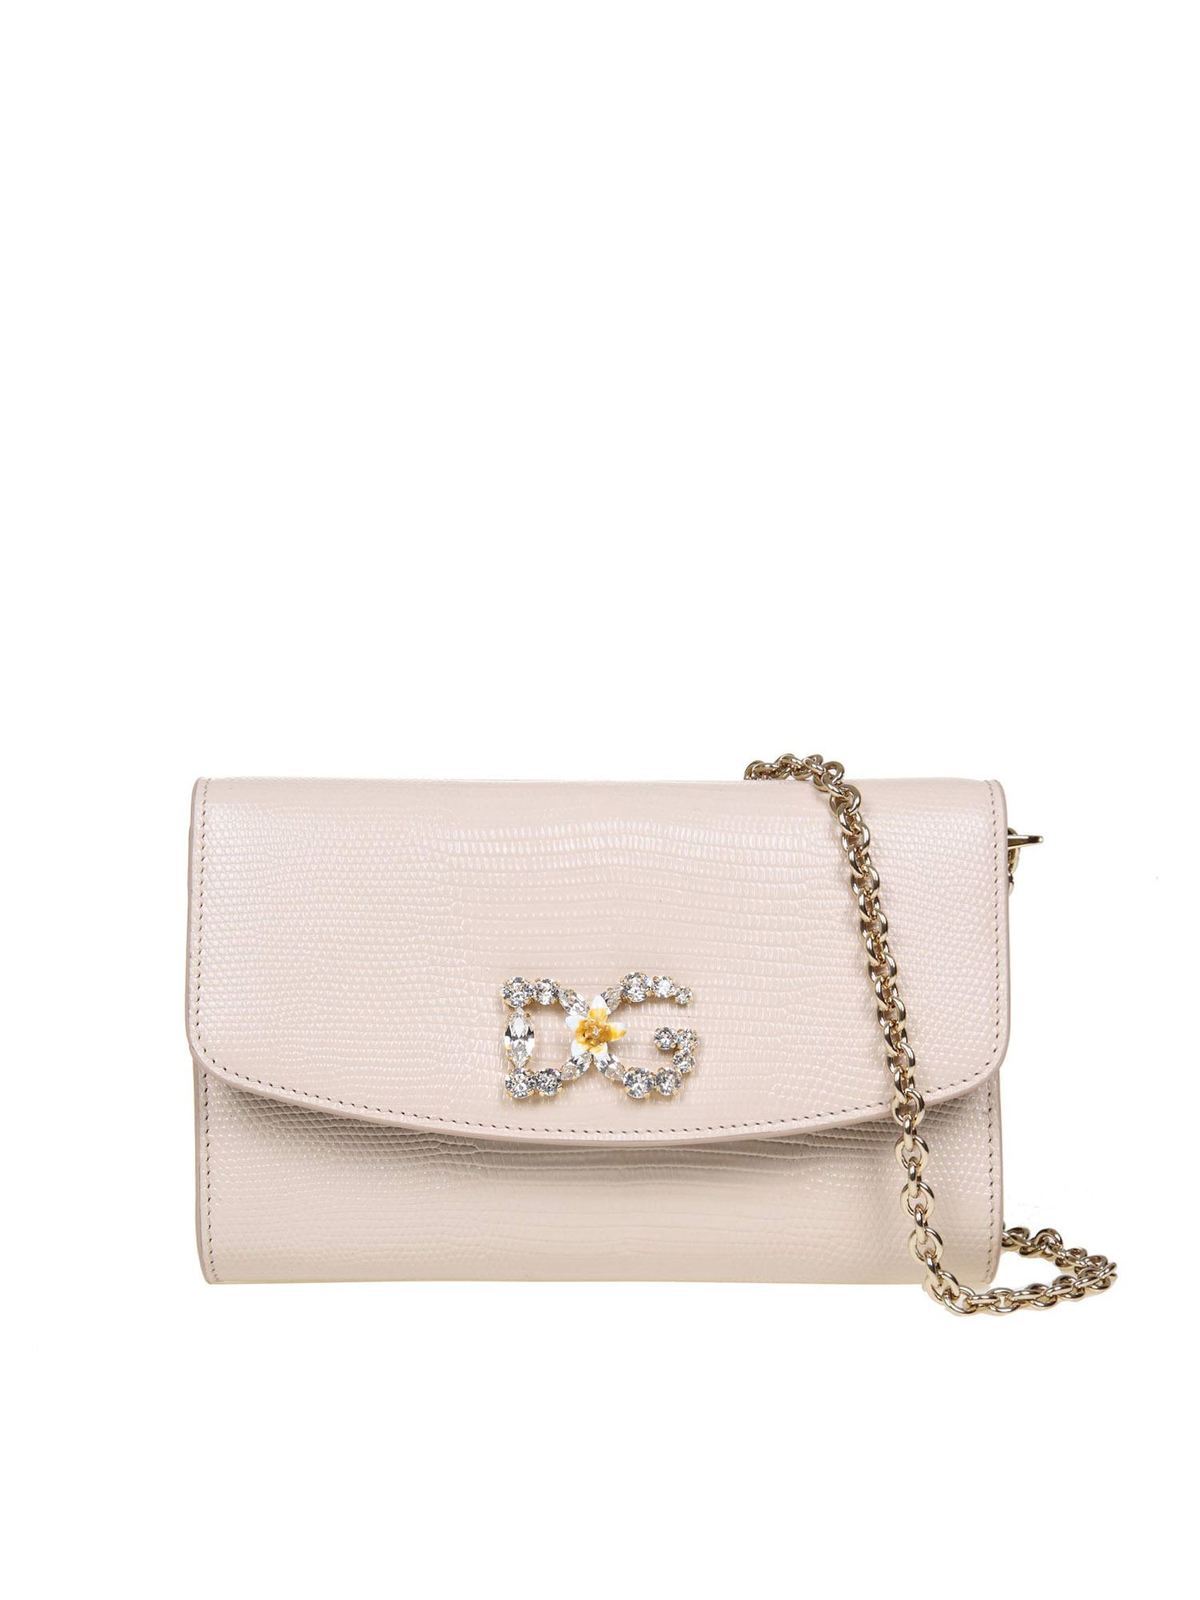 Dolce & Gabbana Mini Bag In Leather With Iguana Print Color Pink Nude